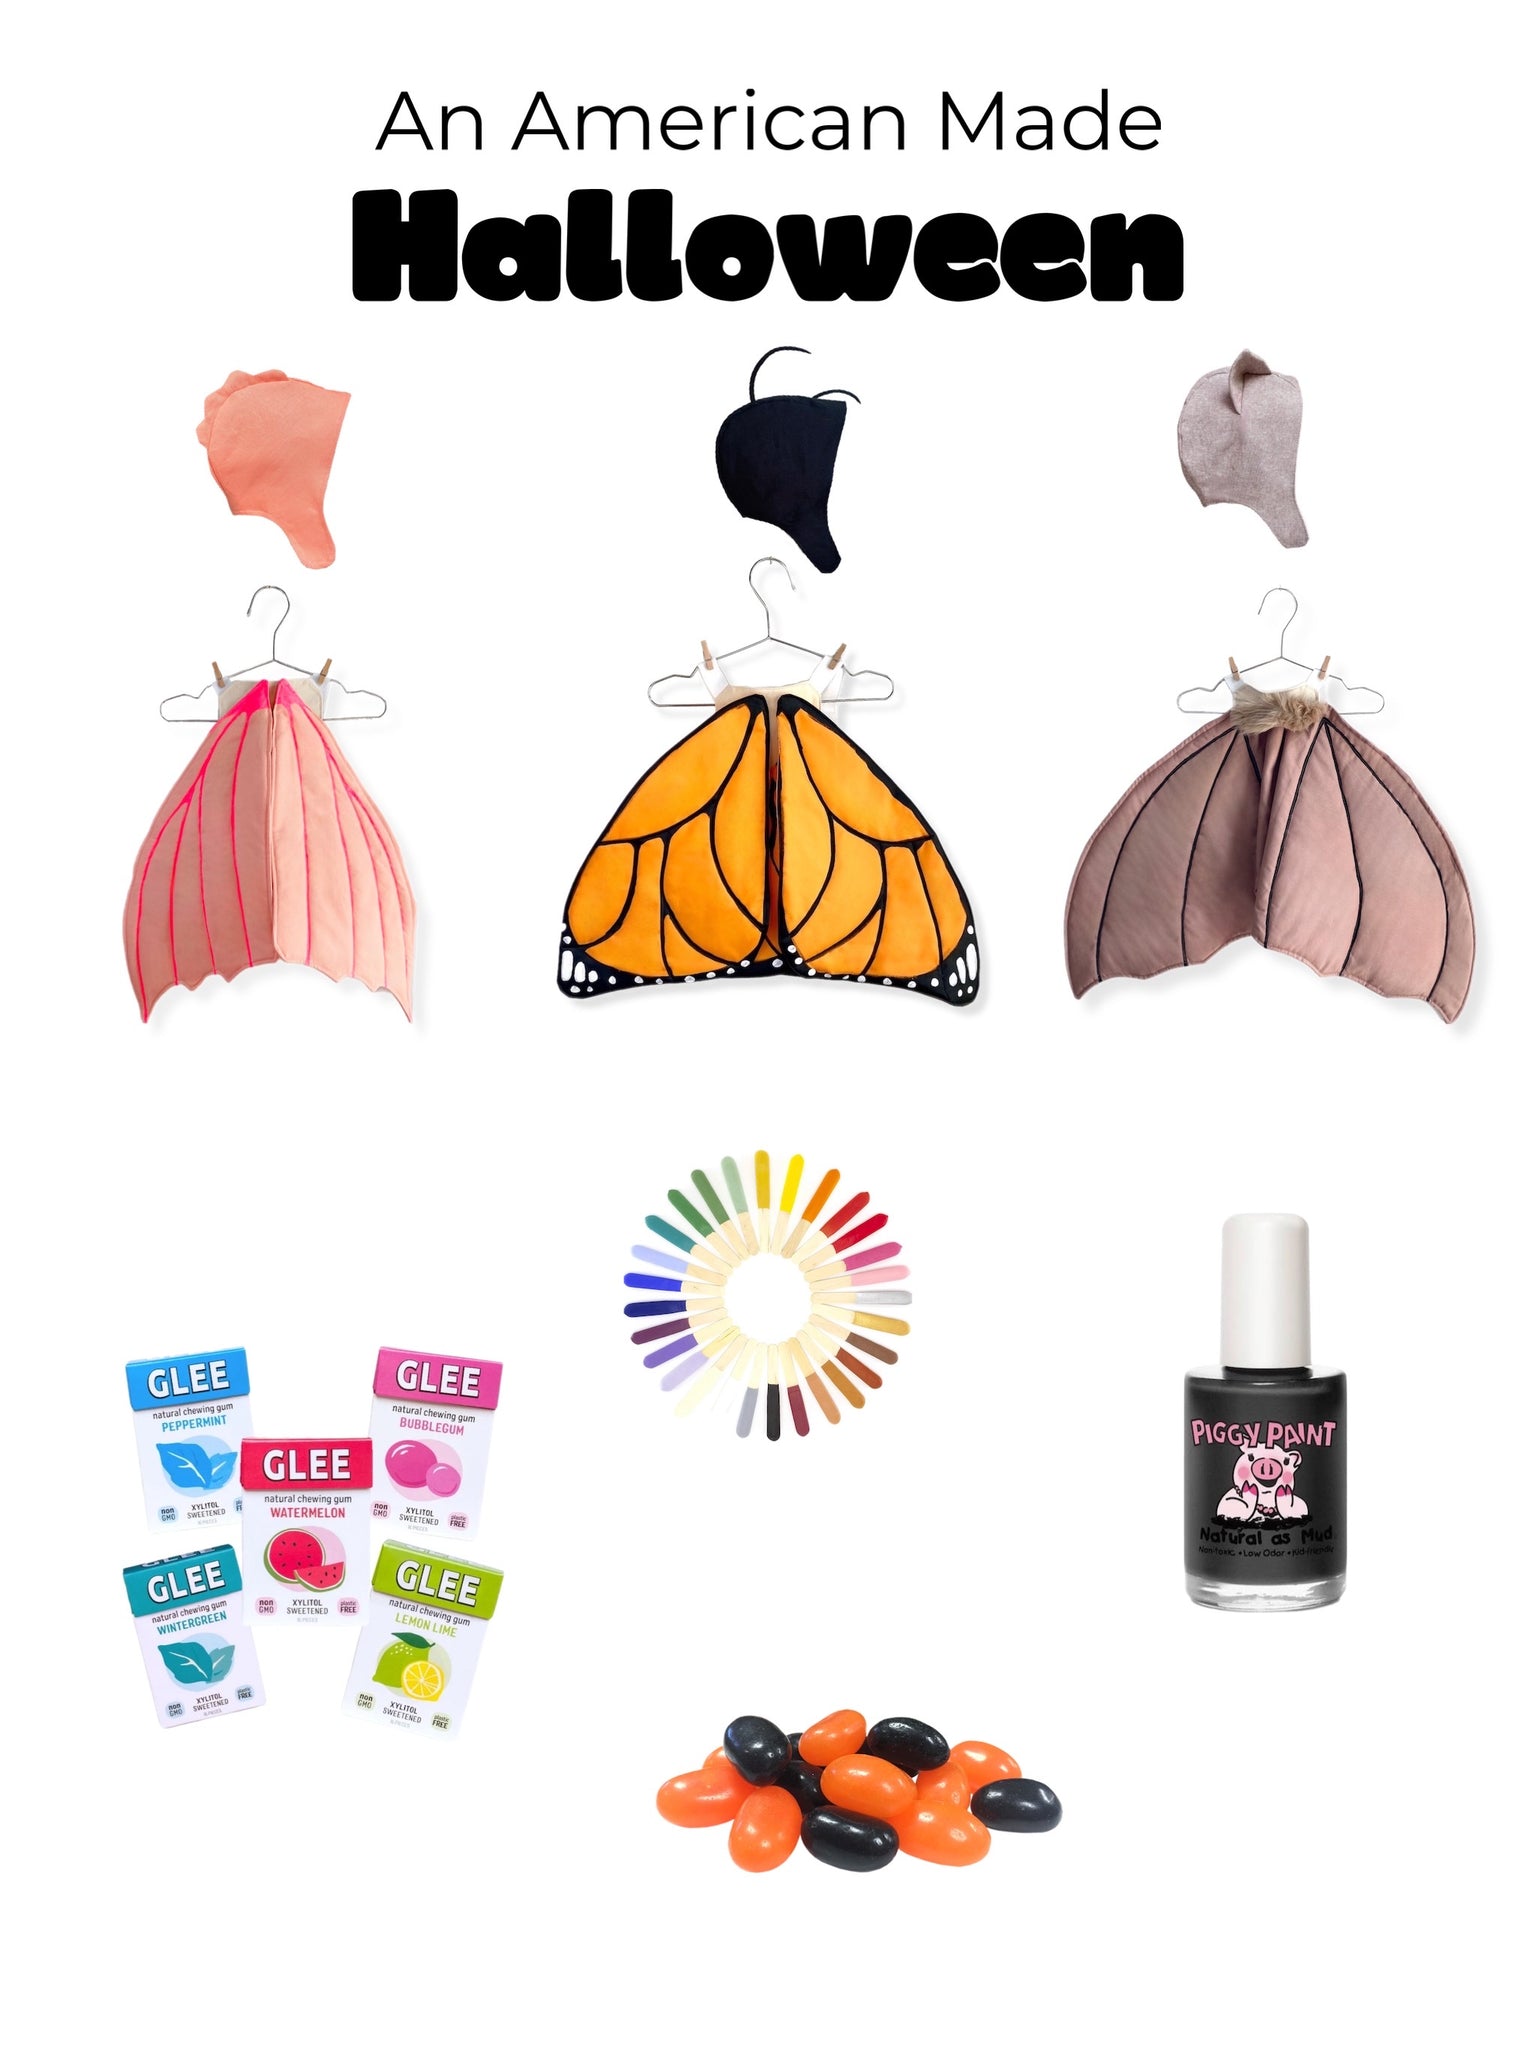 Made in the usa Halloween costumes for kids.